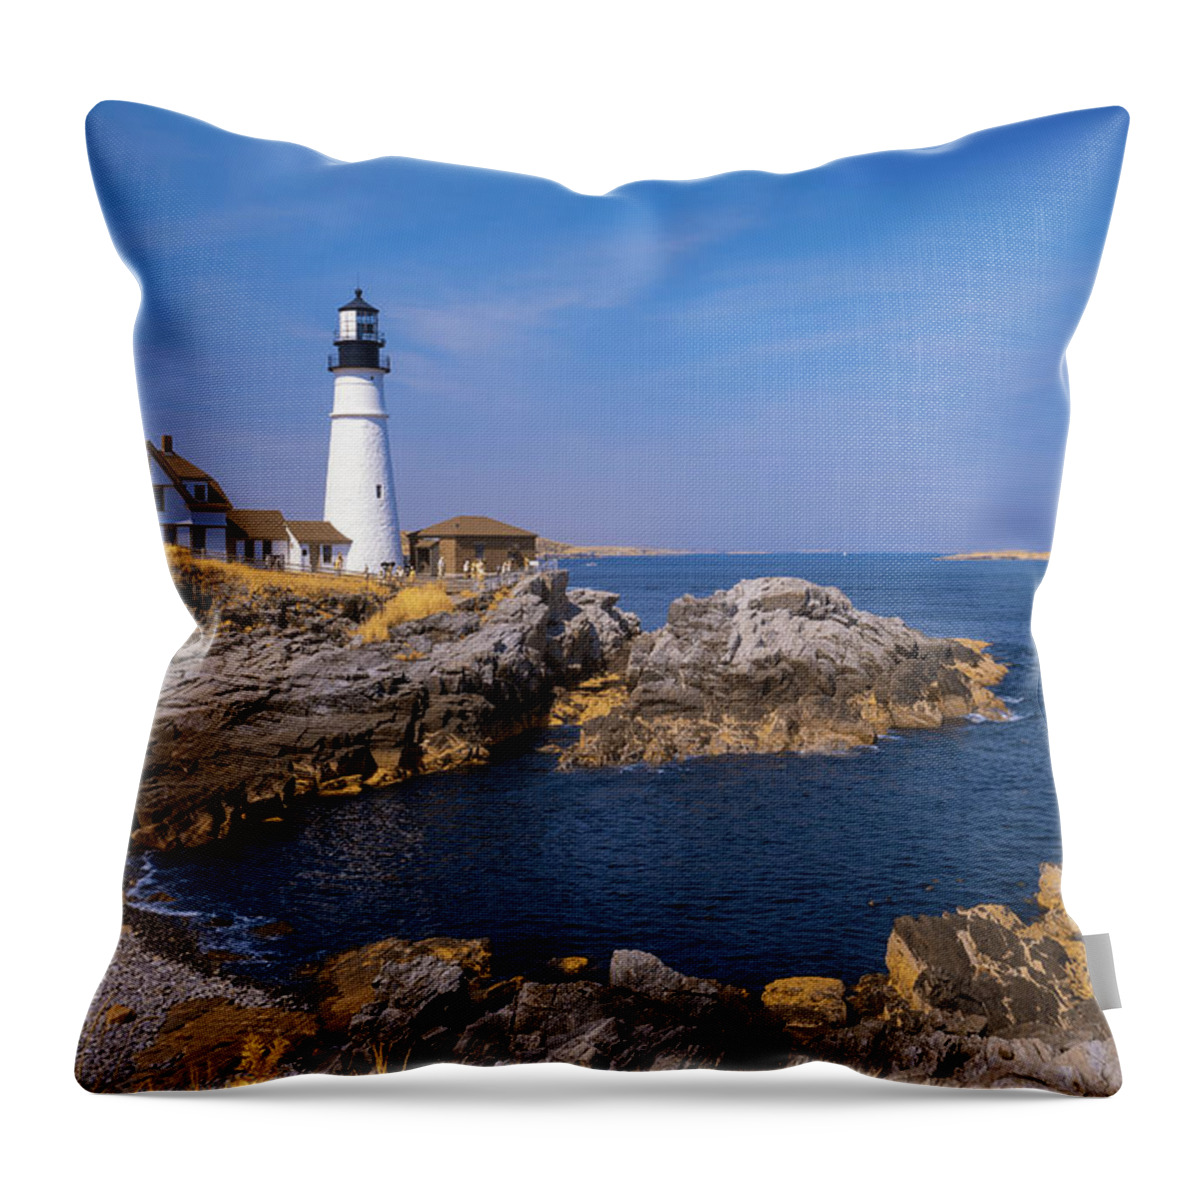 Portland Head Portlandhead Light House Lighthouse Outside Outdoors Atlantic Ocean Scenic Sea Seaside Coast Coastal Oceanside Architecture Ir Tiffen Blue 047 #47 Filter Full Spectrum Camera Newengland Cape Elizabeth New England Maine Me Brian Hale Brianhalephoto Infrared Rocky Outside Outdoors Nature Natural Throw Pillow featuring the photograph Portland Head Infrared Light by Brian Hale